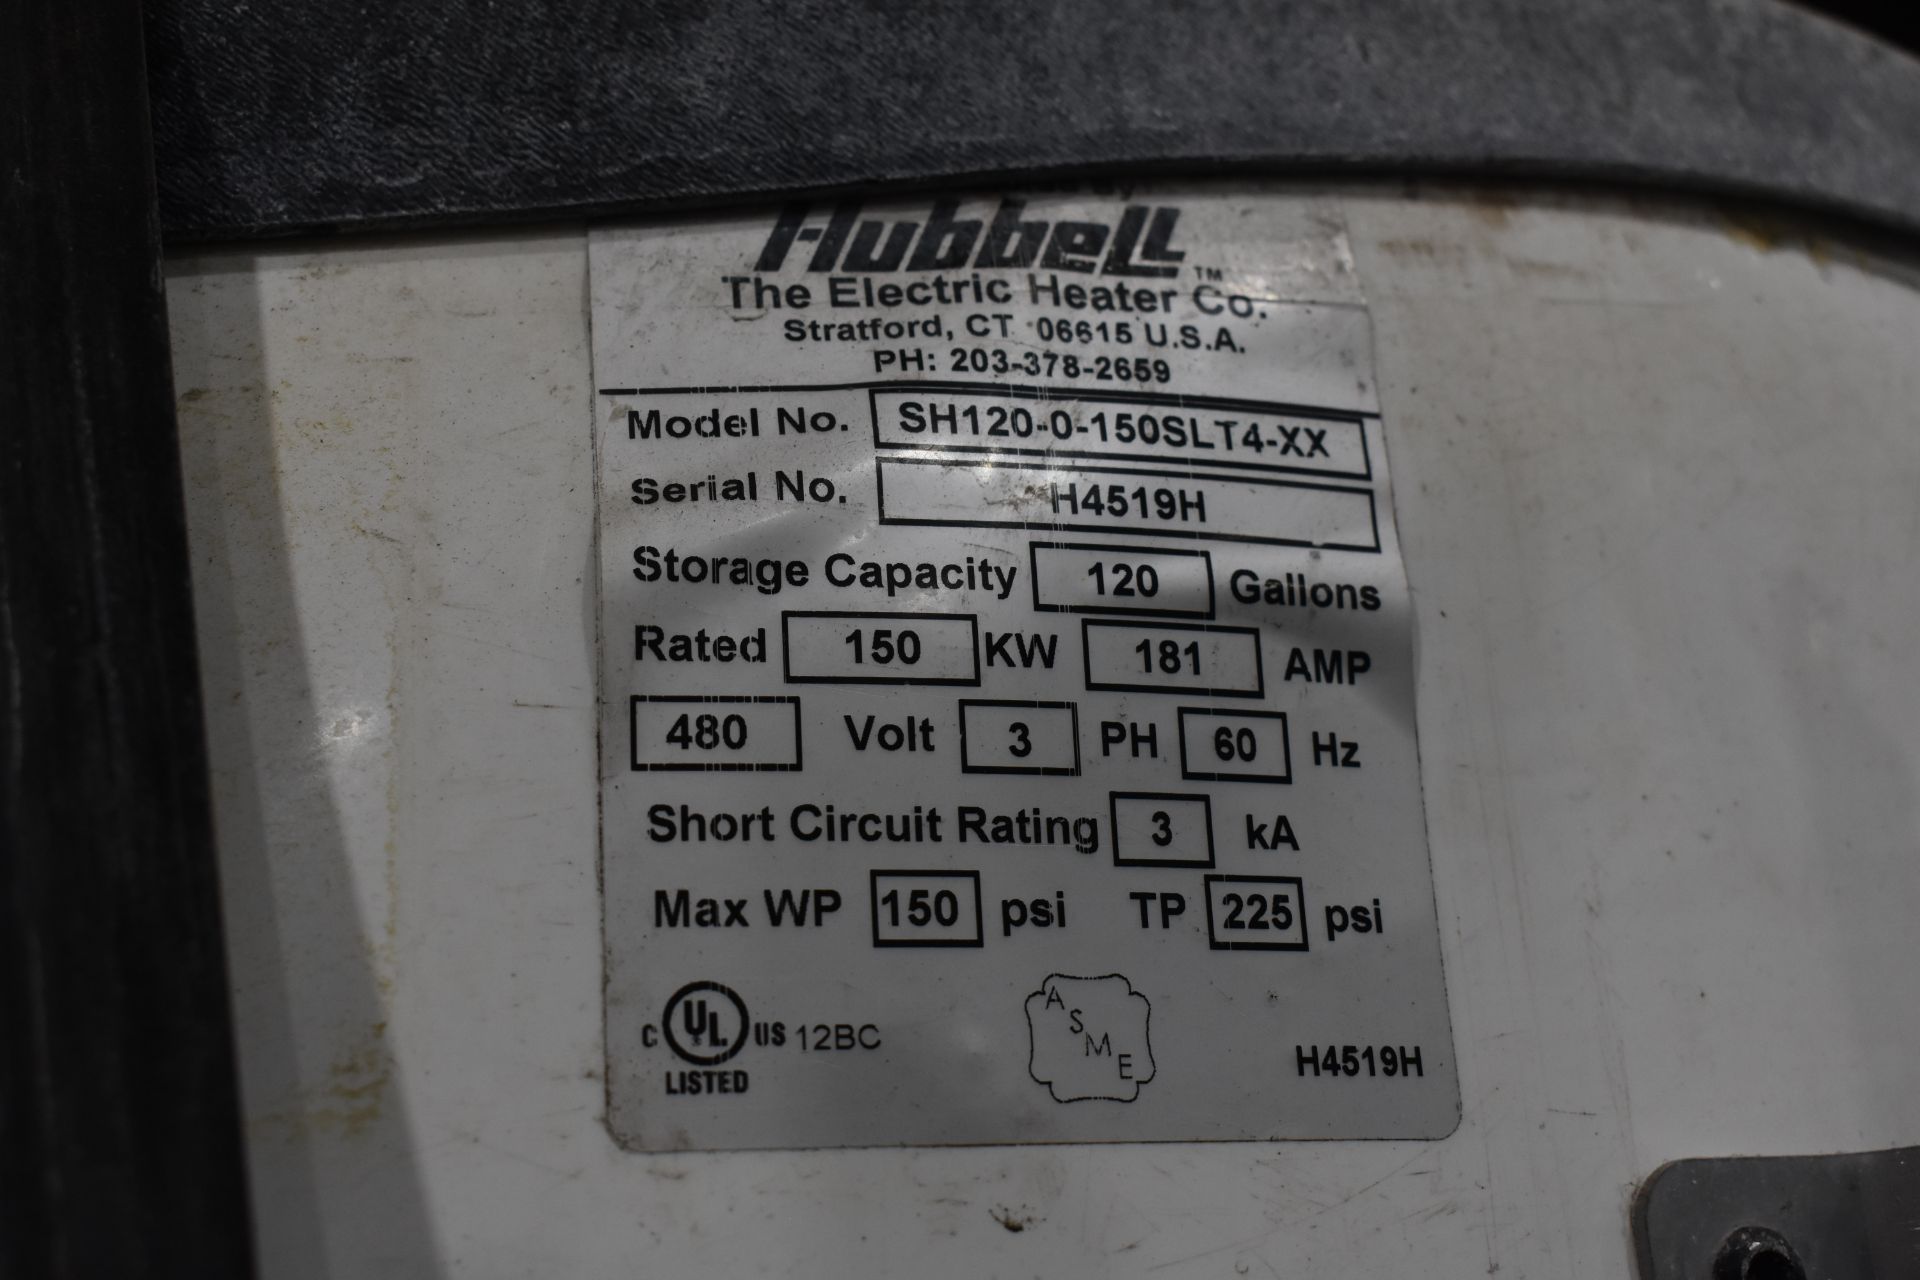 Hubbell Model #SH120 Electric Water Heater - Image 2 of 3